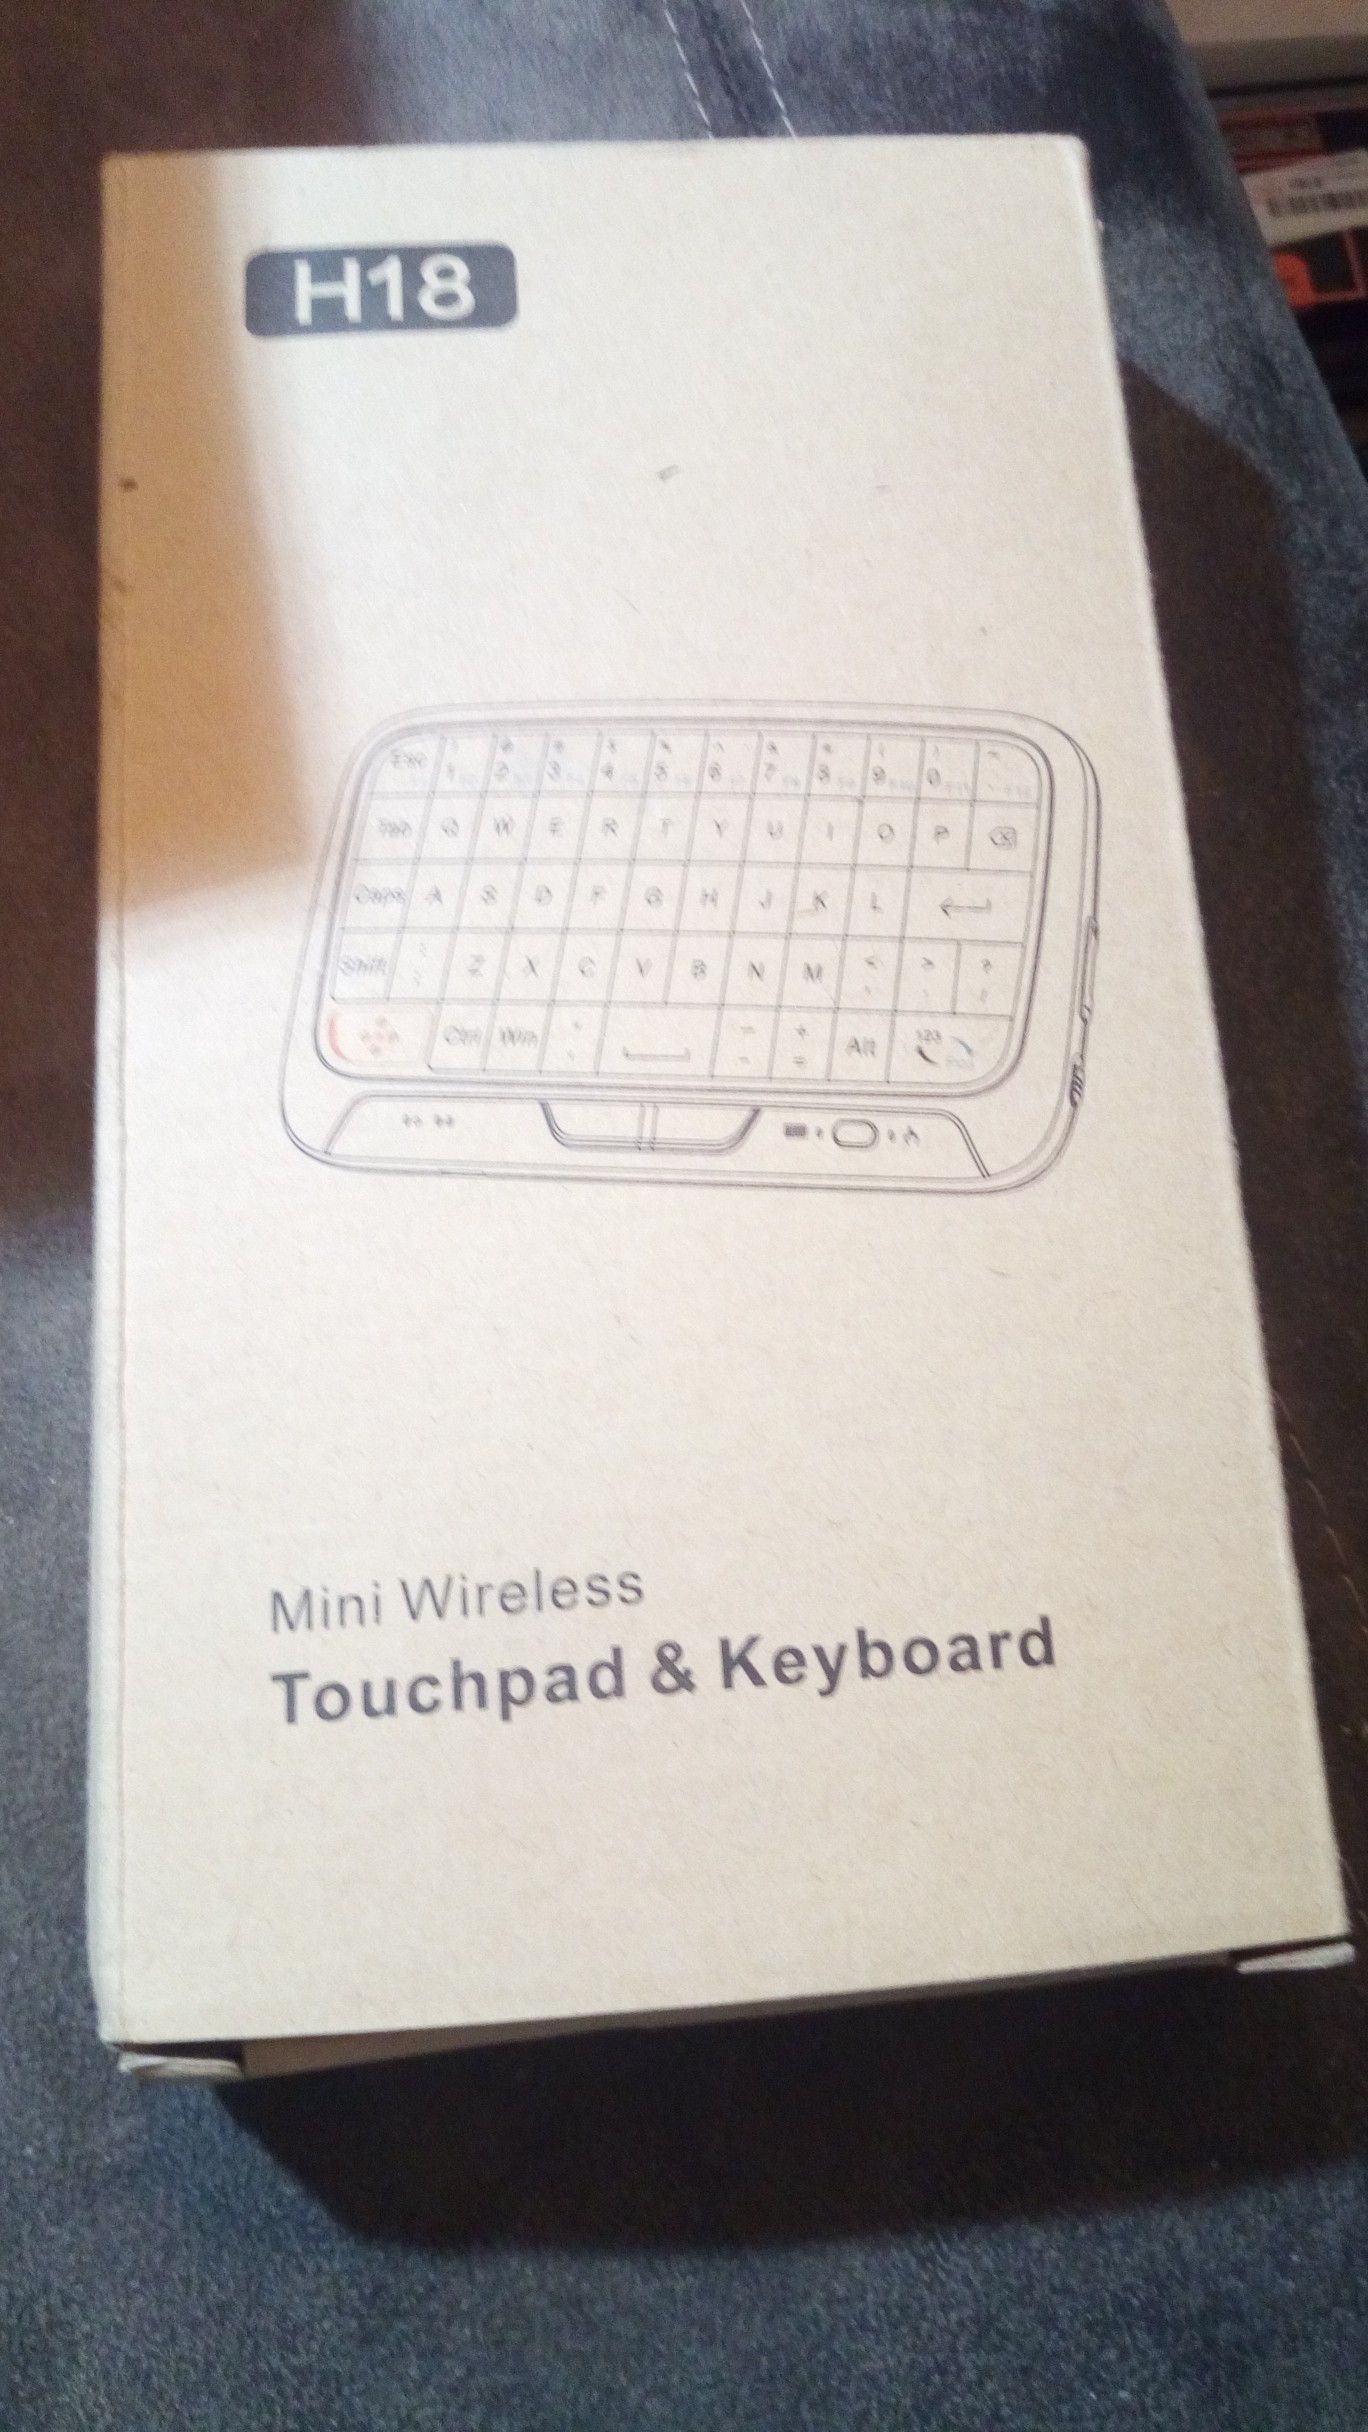 2.4ghz mini wireless keyboard and touchpad